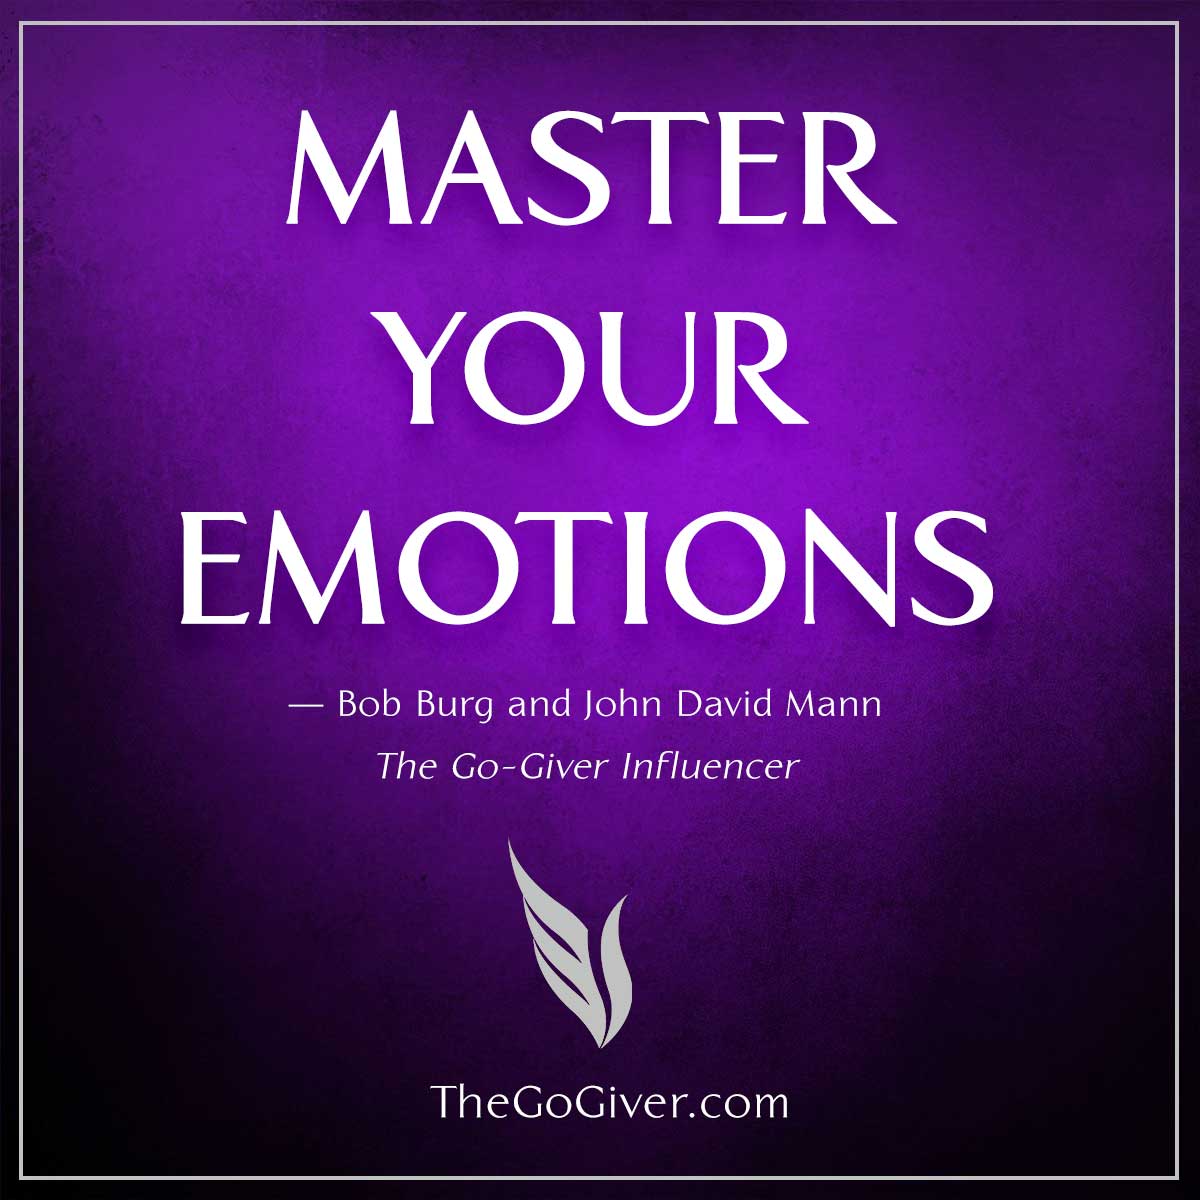 Master Your Emotions - The Go-Giver Influencer